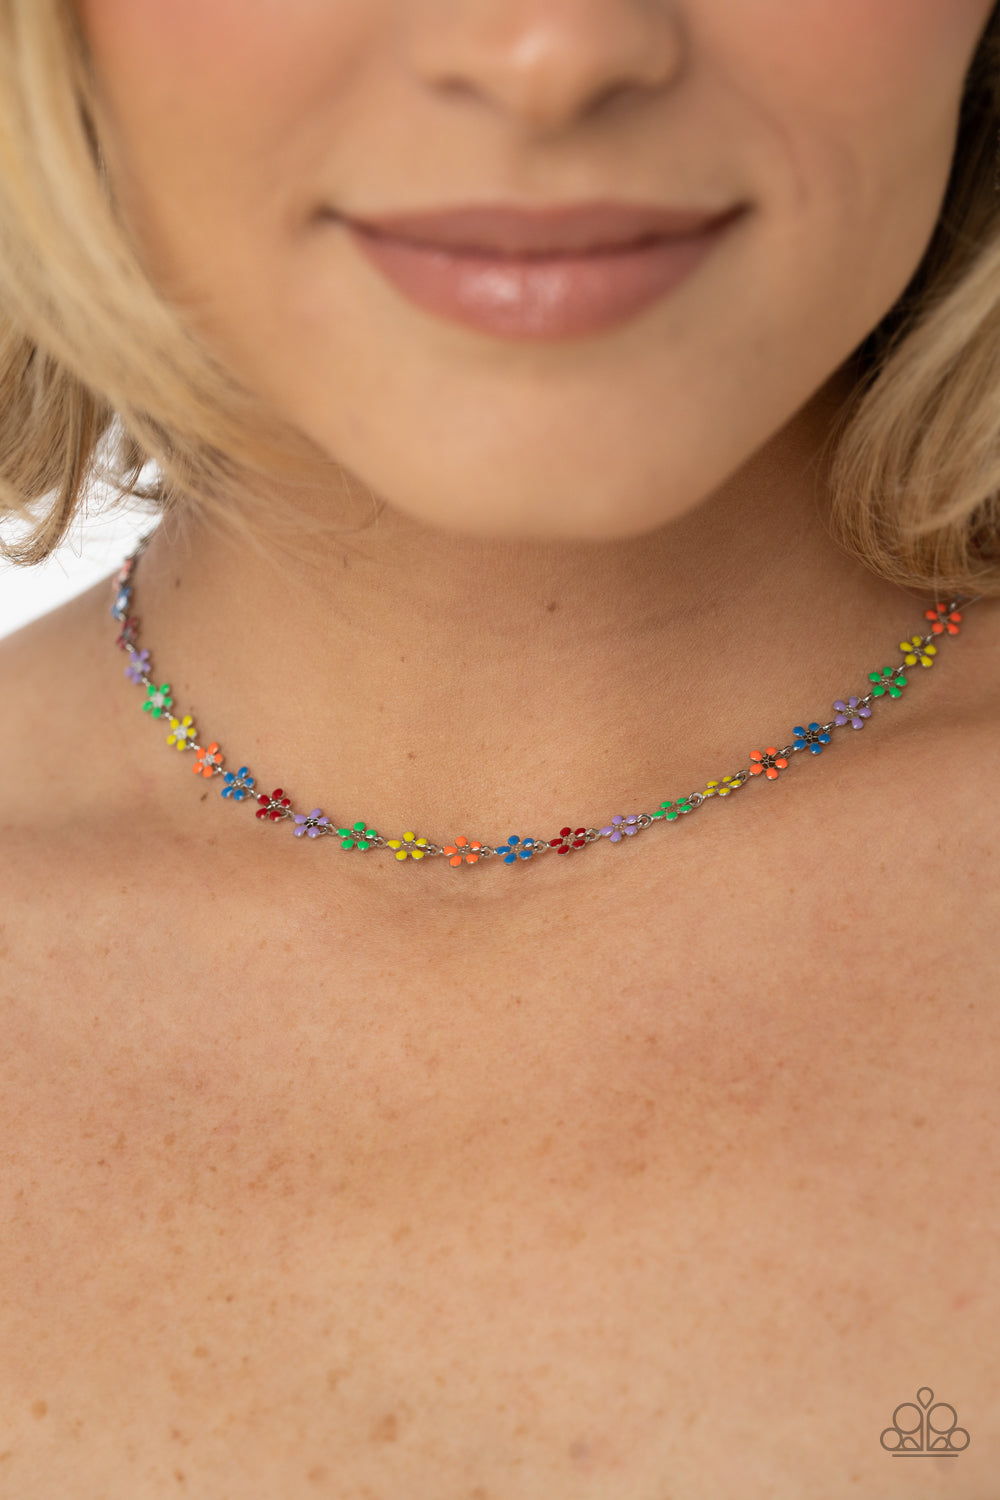 Paparazzi Accessories Floral Catwalk - Multi Dotted with dainty silver flower centers, colorful petaled flowers link below the collar for a colorfully seasonal look. Features an adjustable clasp closure. Sold as one individual necklace. Includes one pair